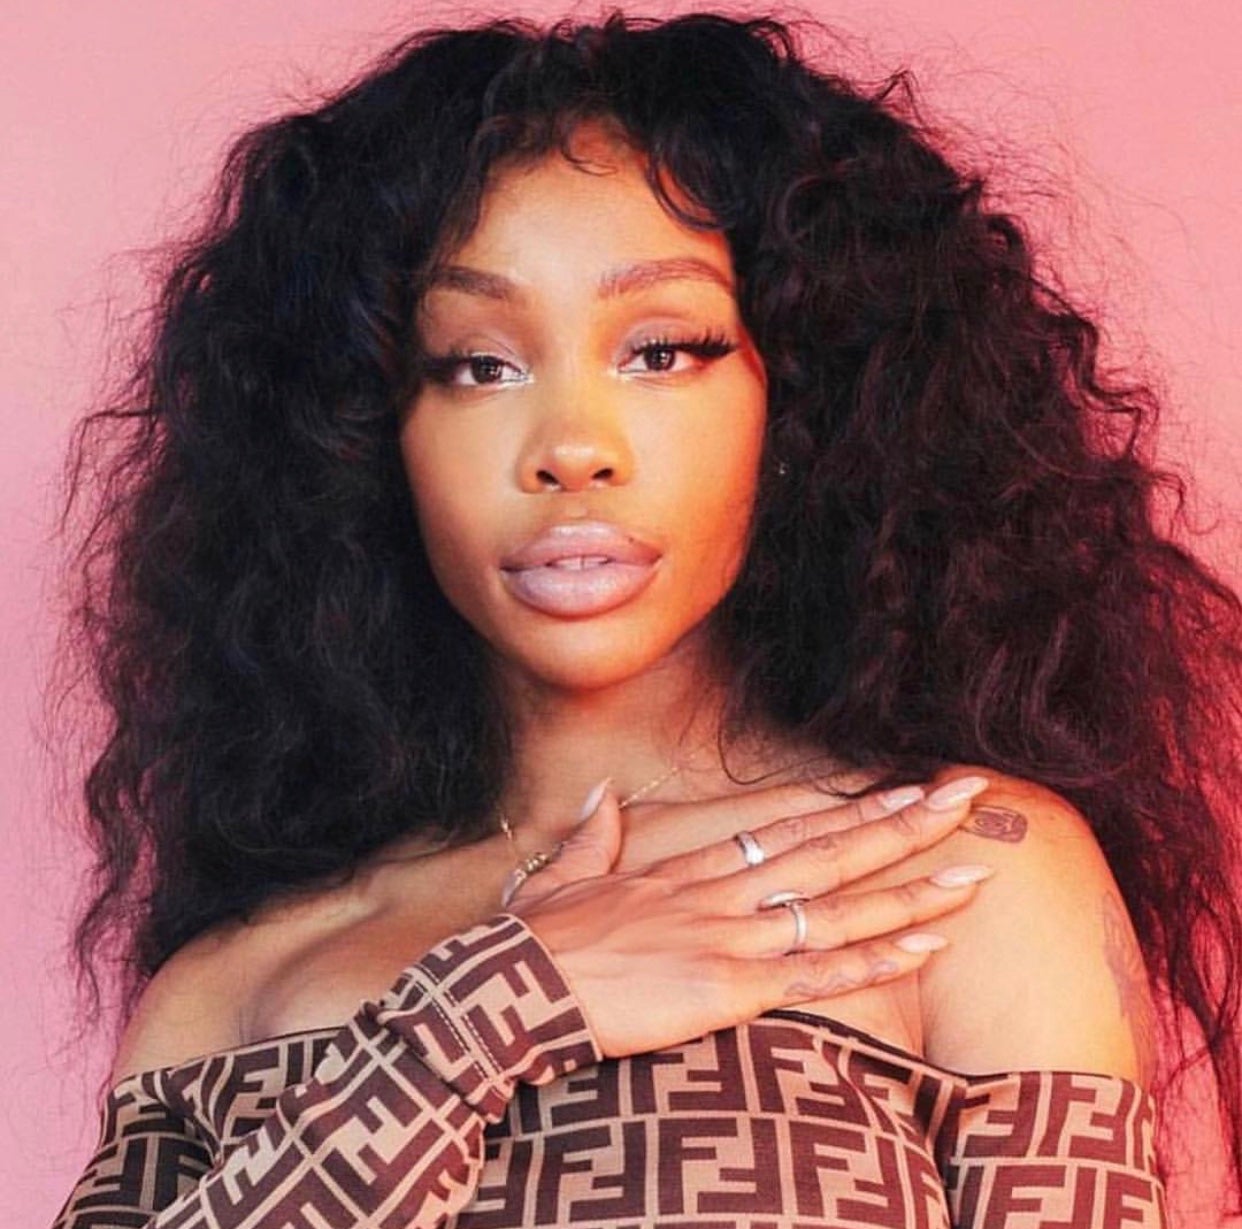 SZA And Kendrick Lamar Earn Their First Golden Globe Nominations For 'All The Stars'